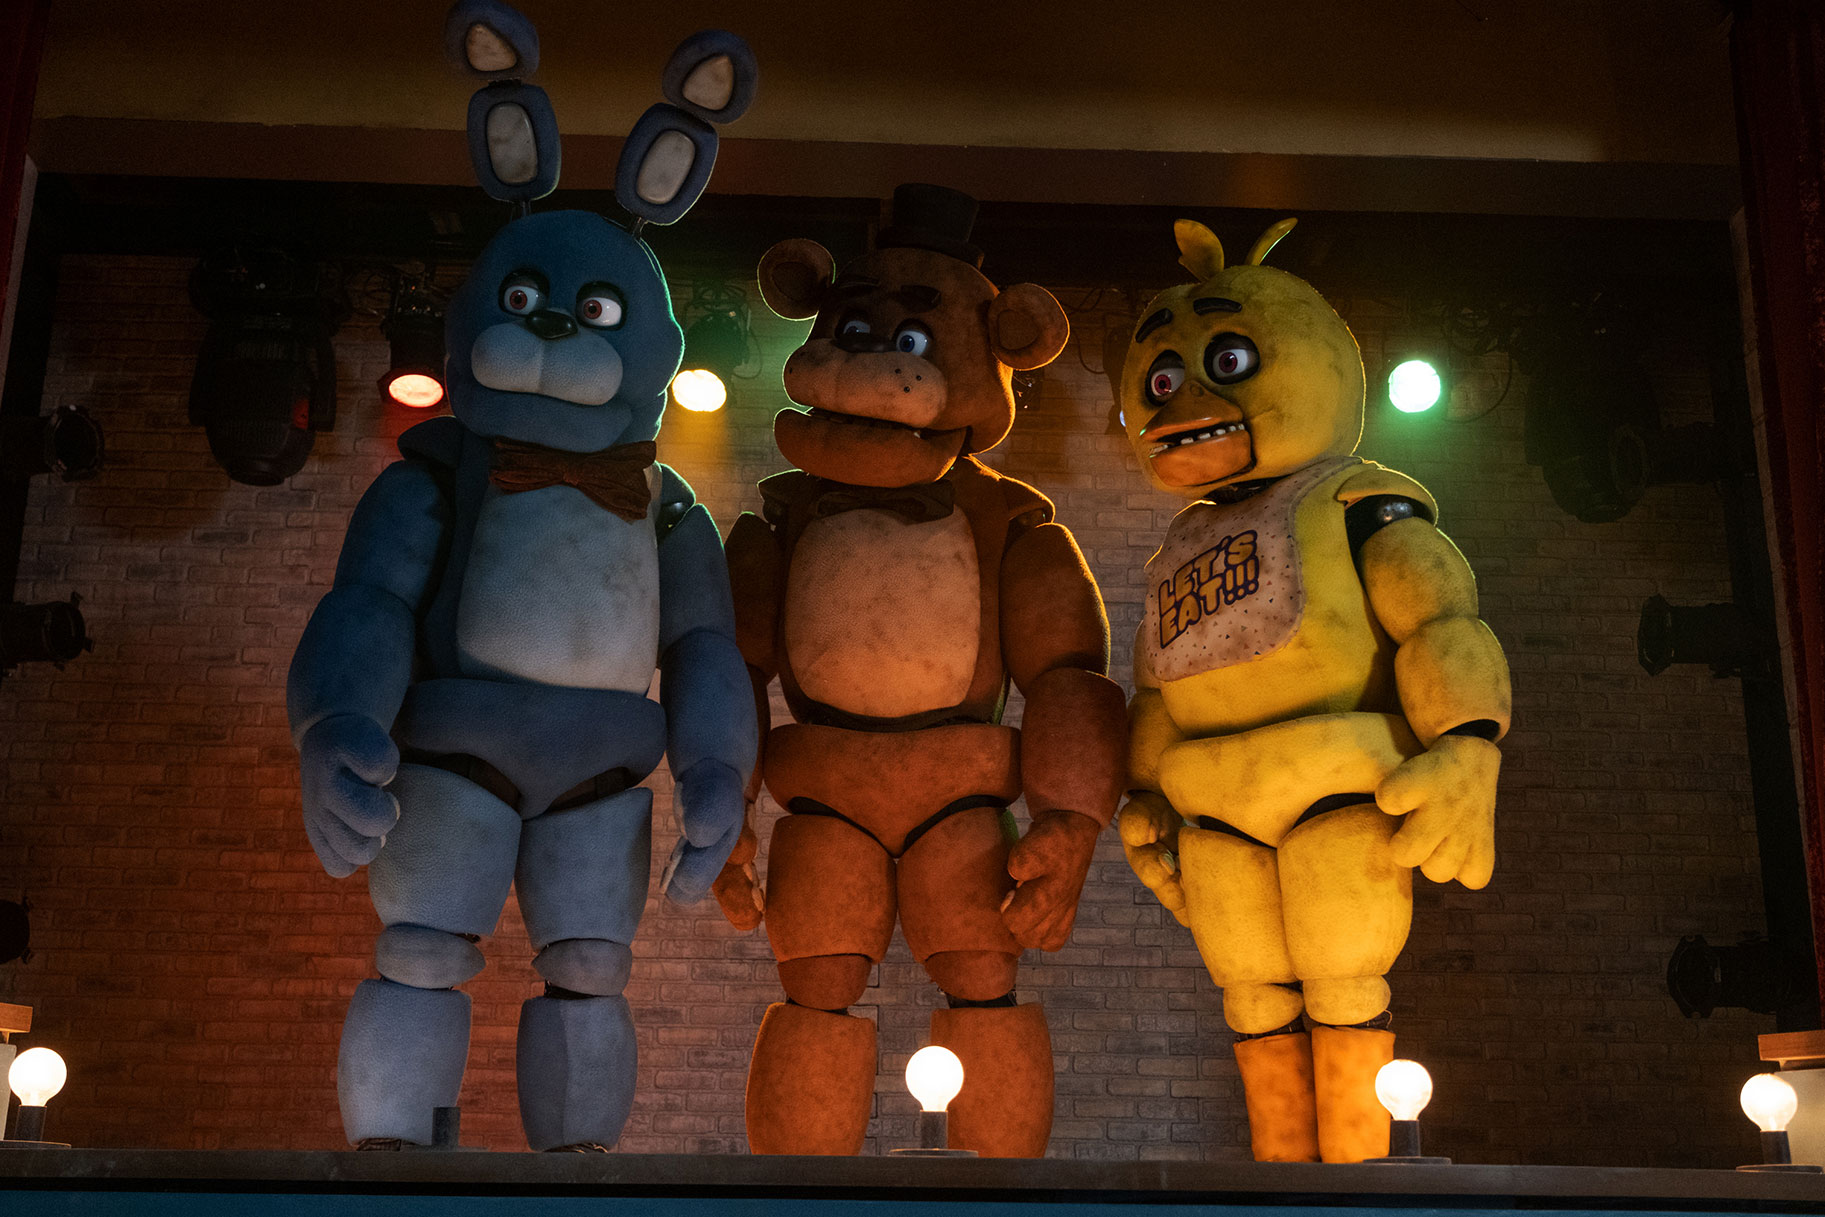 If you were to choose a animatronic to be good, if a story